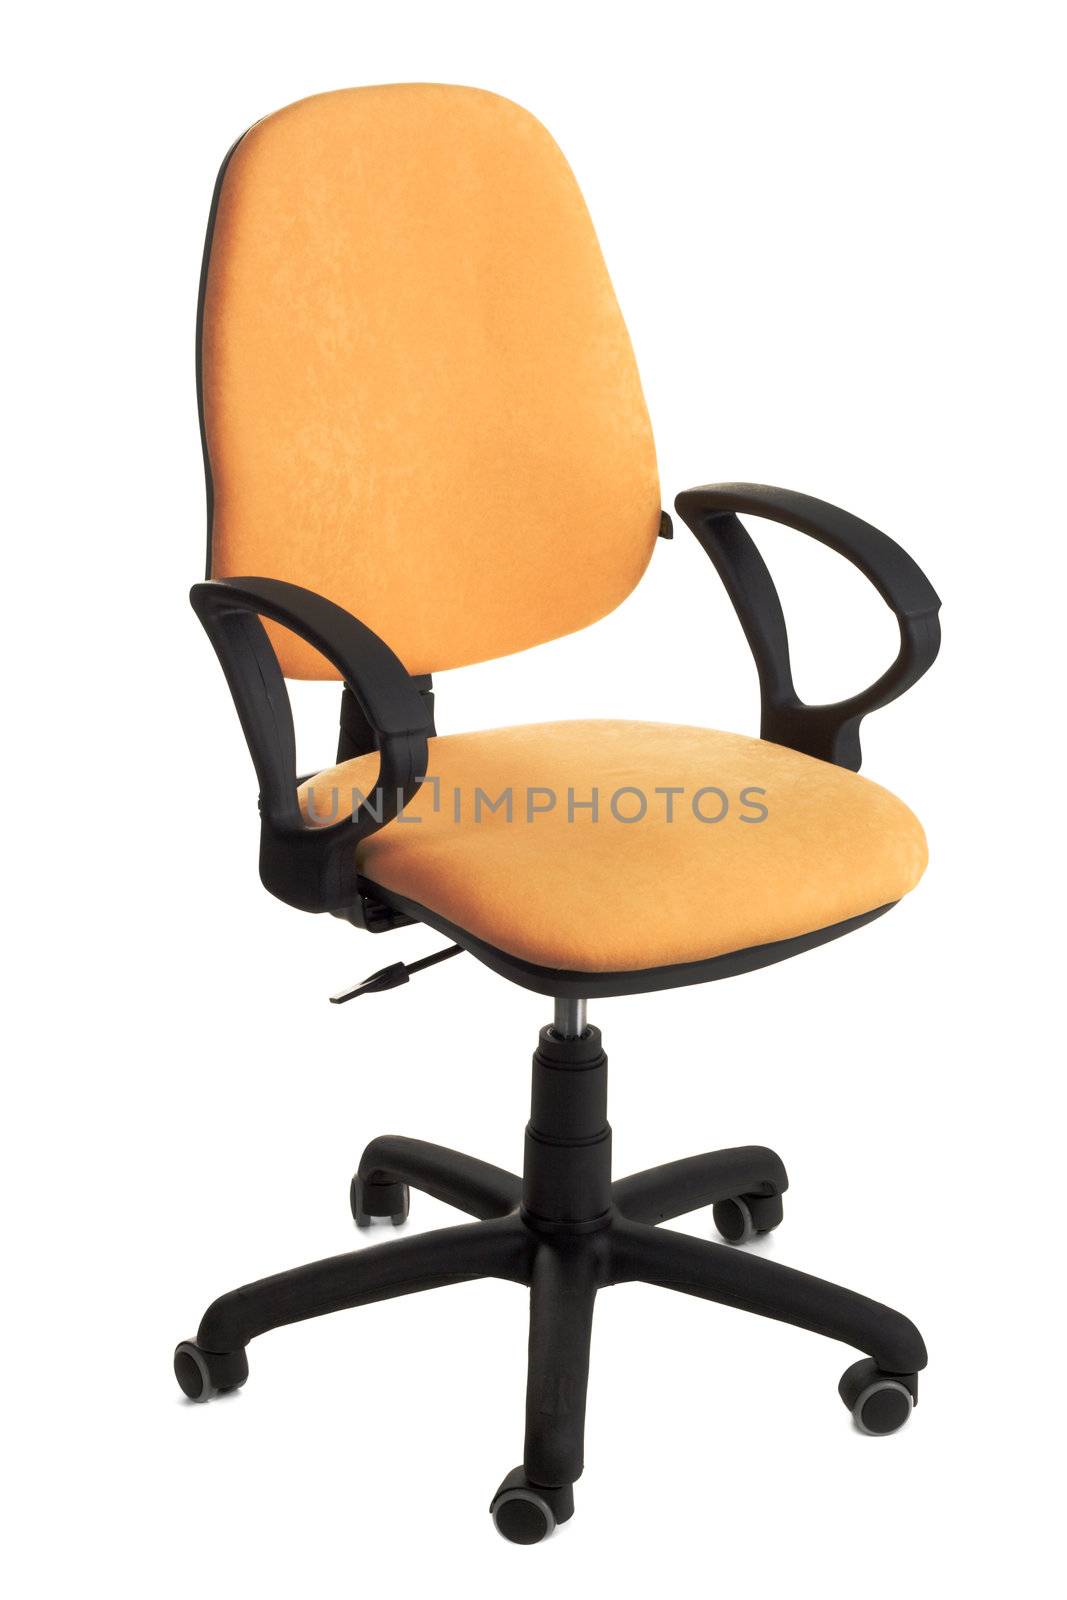 Yellow office chair isolated on white background